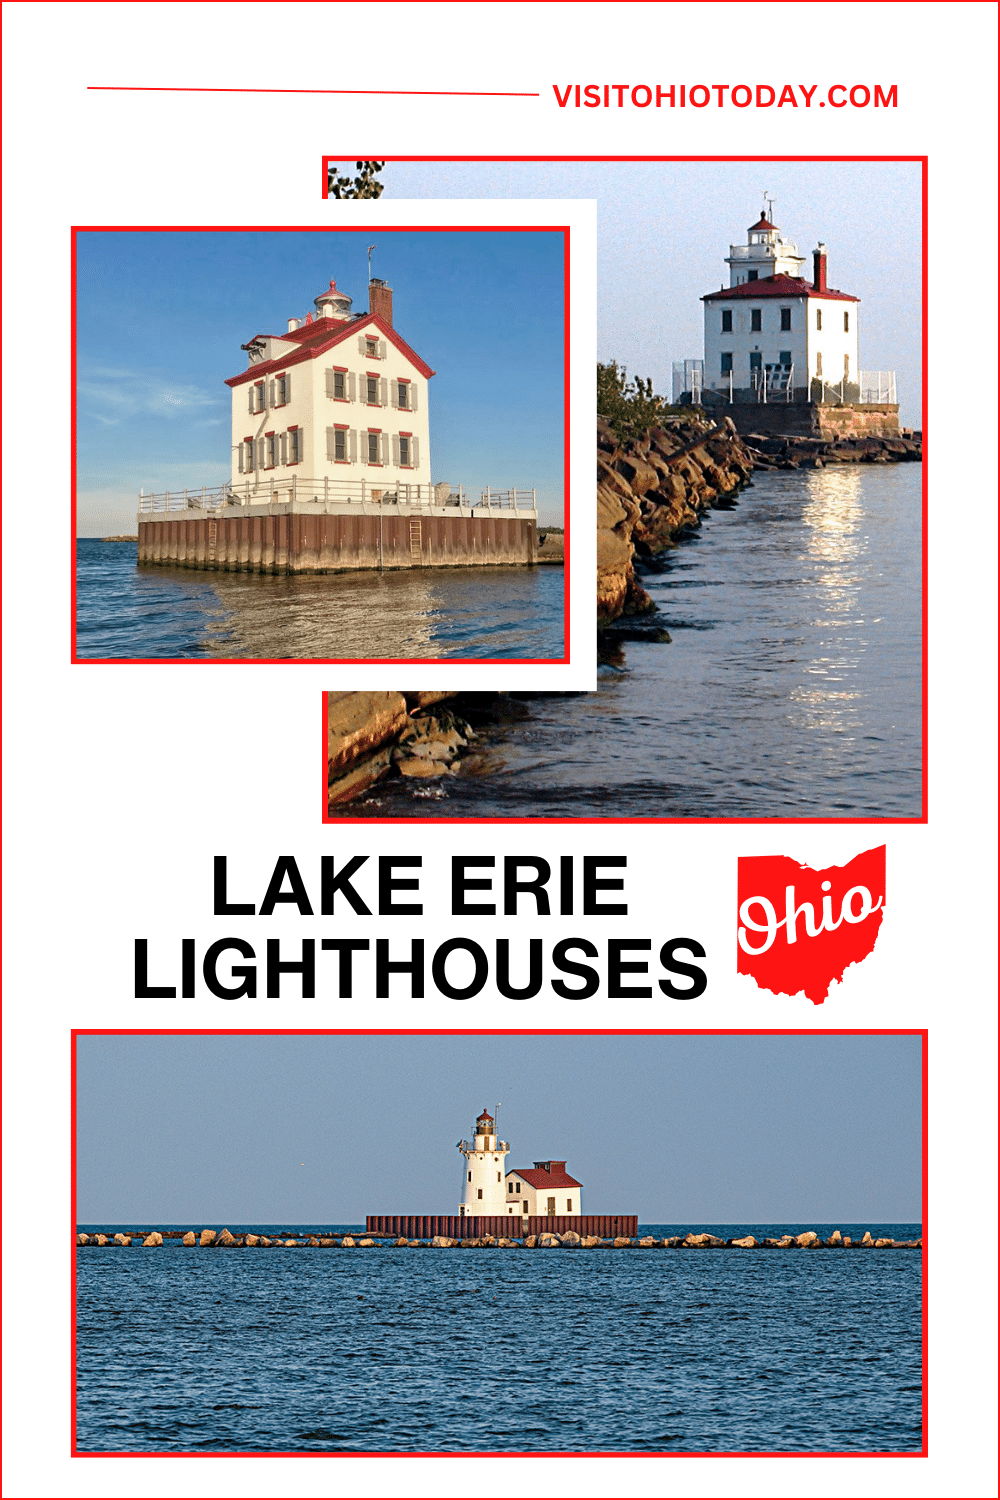 Lighthouses are a thing of beauty and in Ohio, we are lucky to have over 20 of them on Lake Erie. In this post, I have picked the 12 best Lake Erie Lighthouses that are located in Ohio. Read on to see if you agree, or if you can offer any suggestions! Lake Erie Lighthouses | Lake Erie Ohio | Erie County